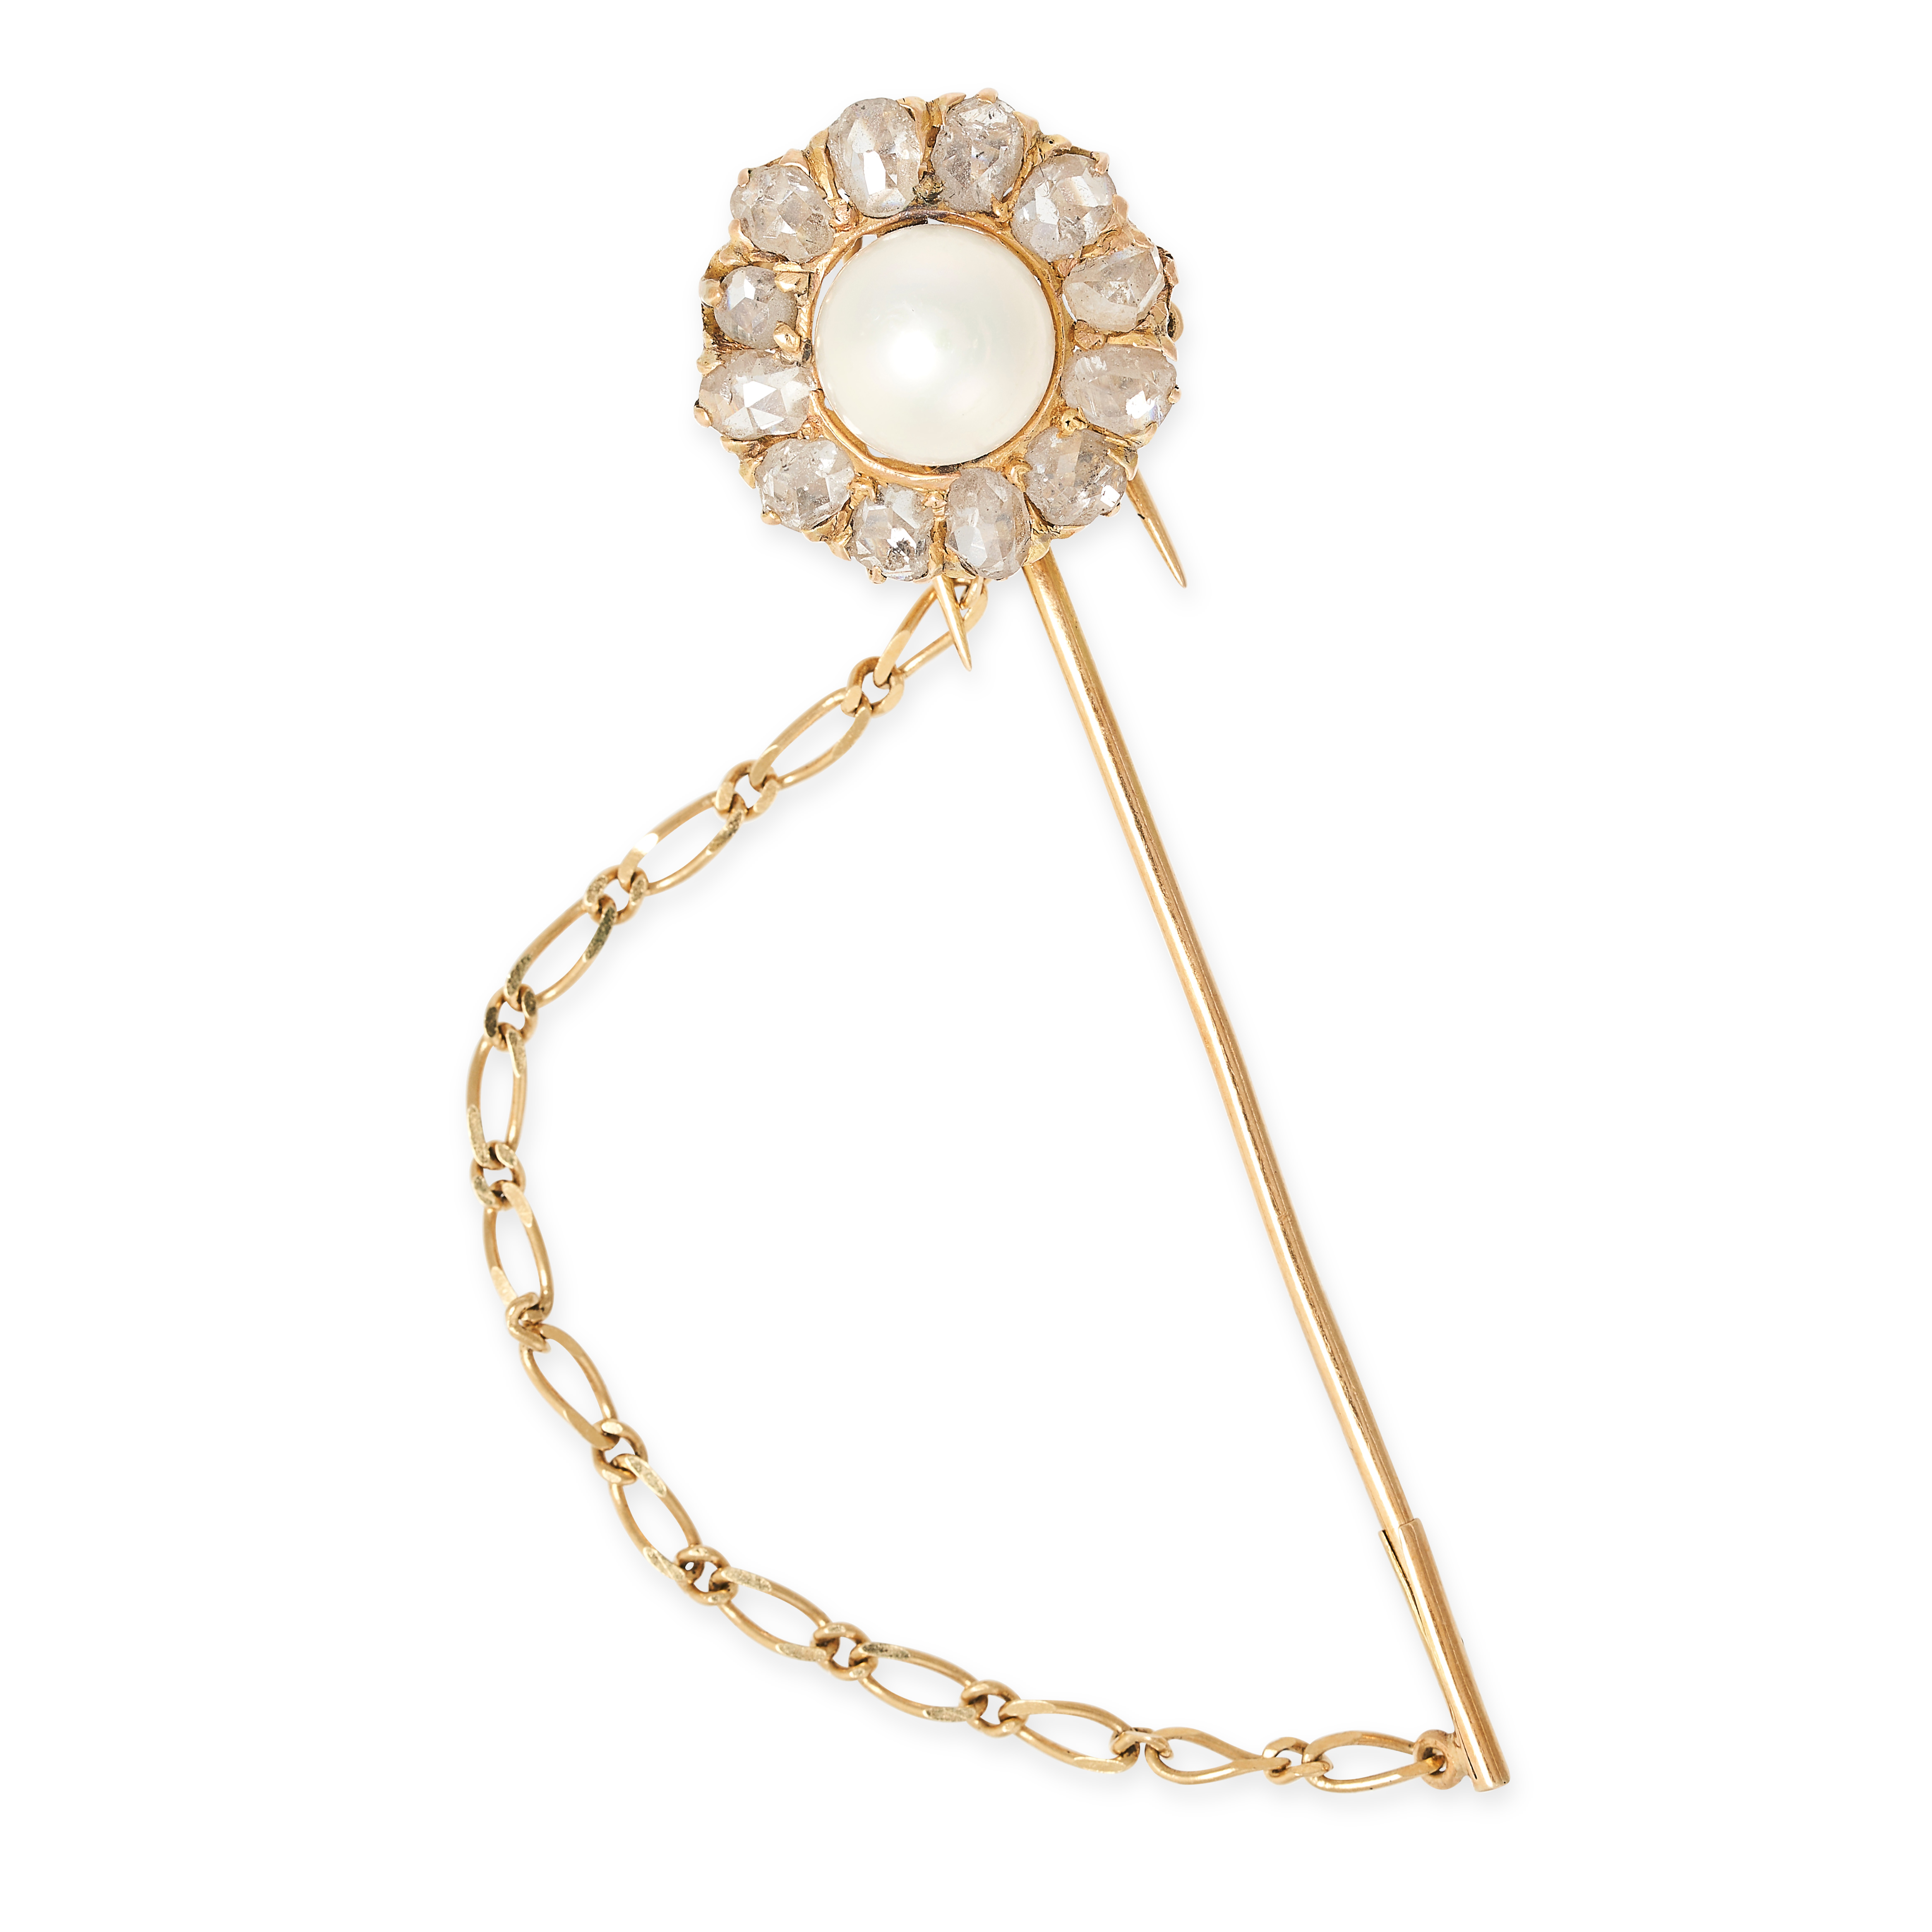 AN ANTIQUE PEARL AND DIAMOND STICK PIN in yellow gold, set with a pearl of 7.5mm within a cluster of